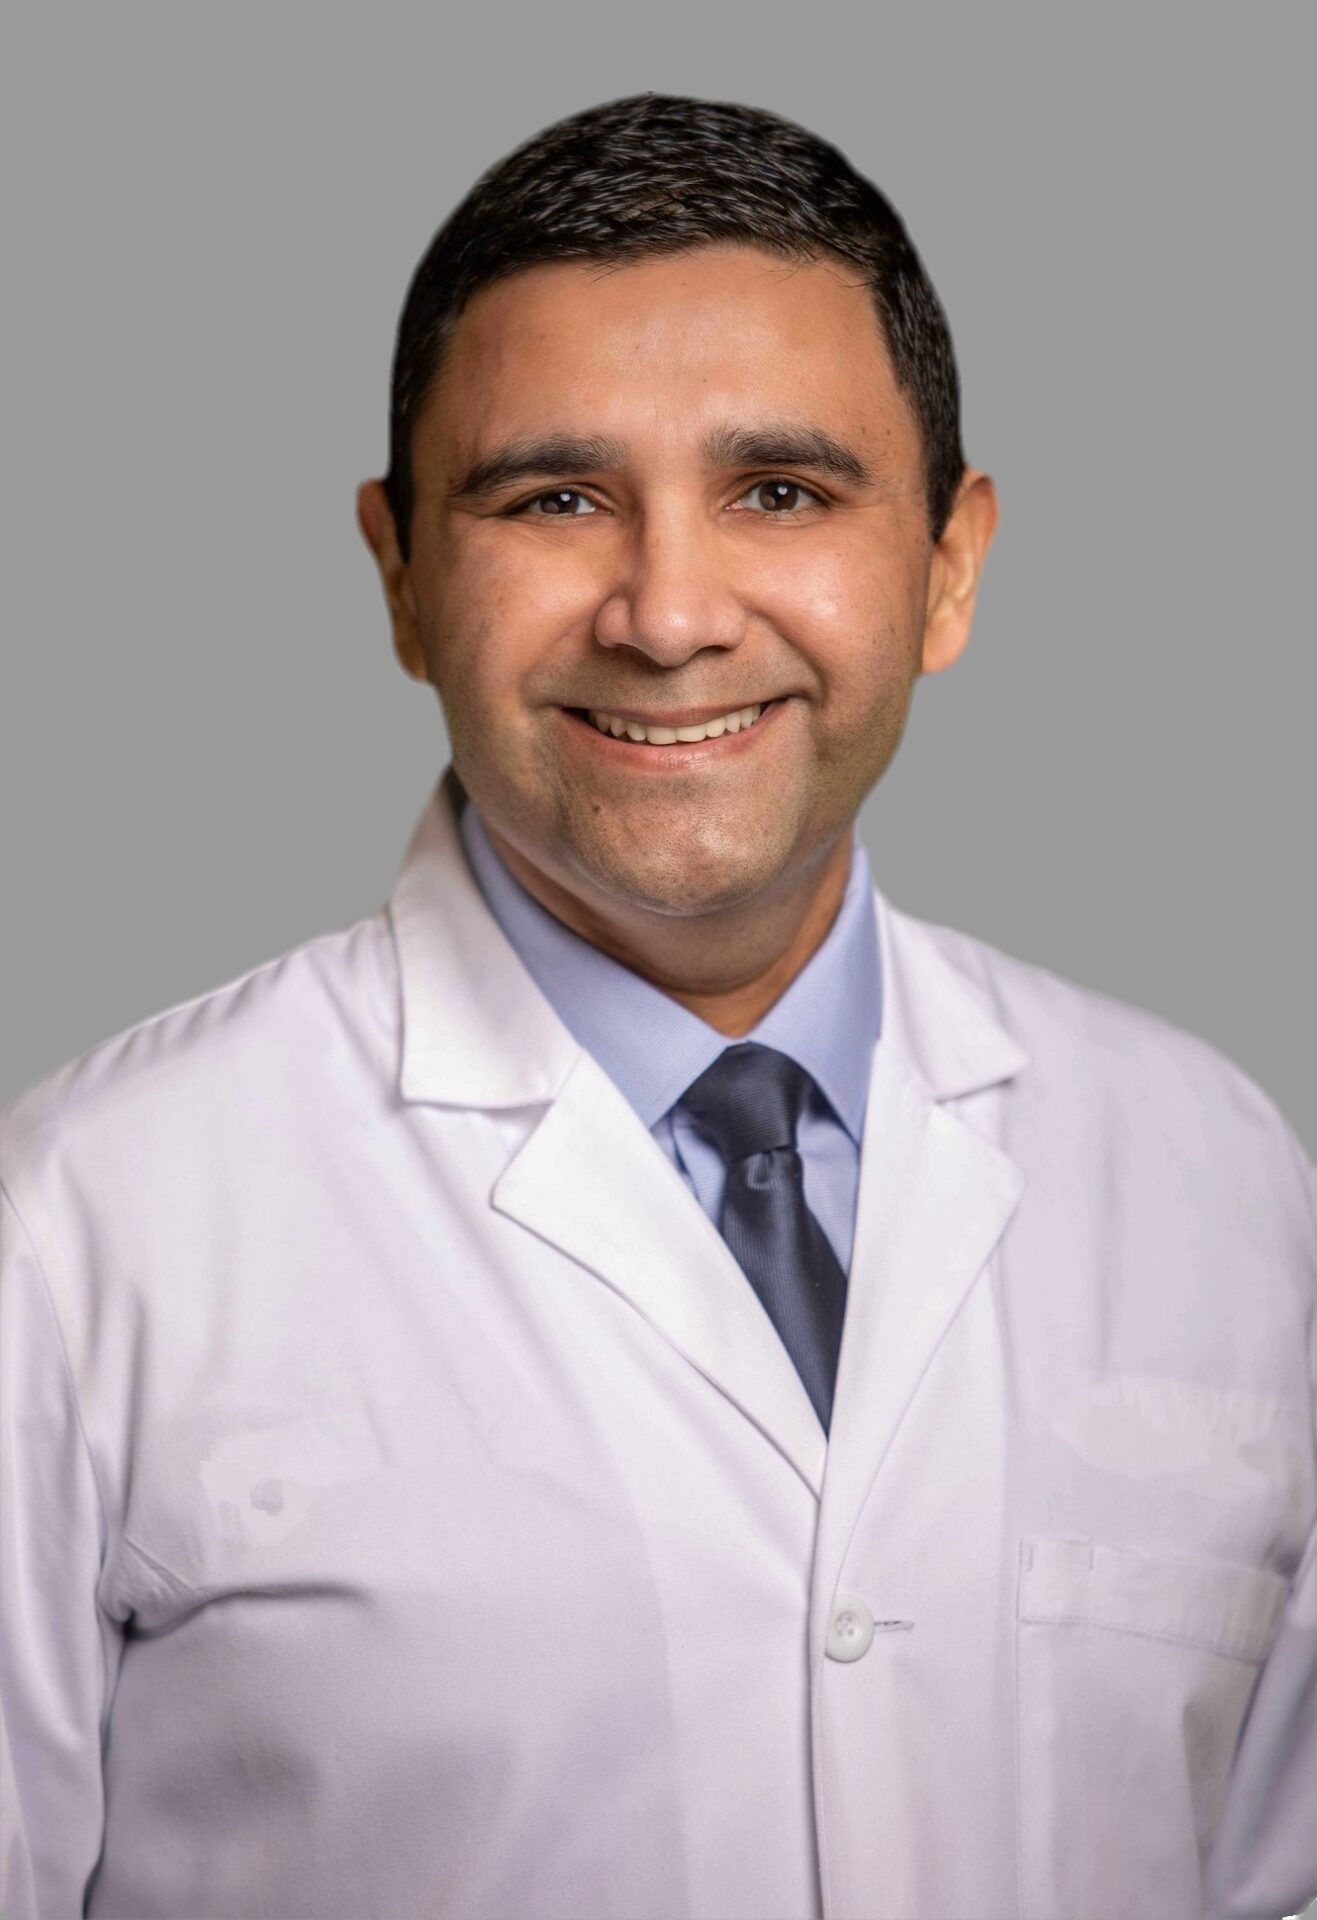 MedEd University | USMLE Step 2 Q&A with Kashif Piracha MD